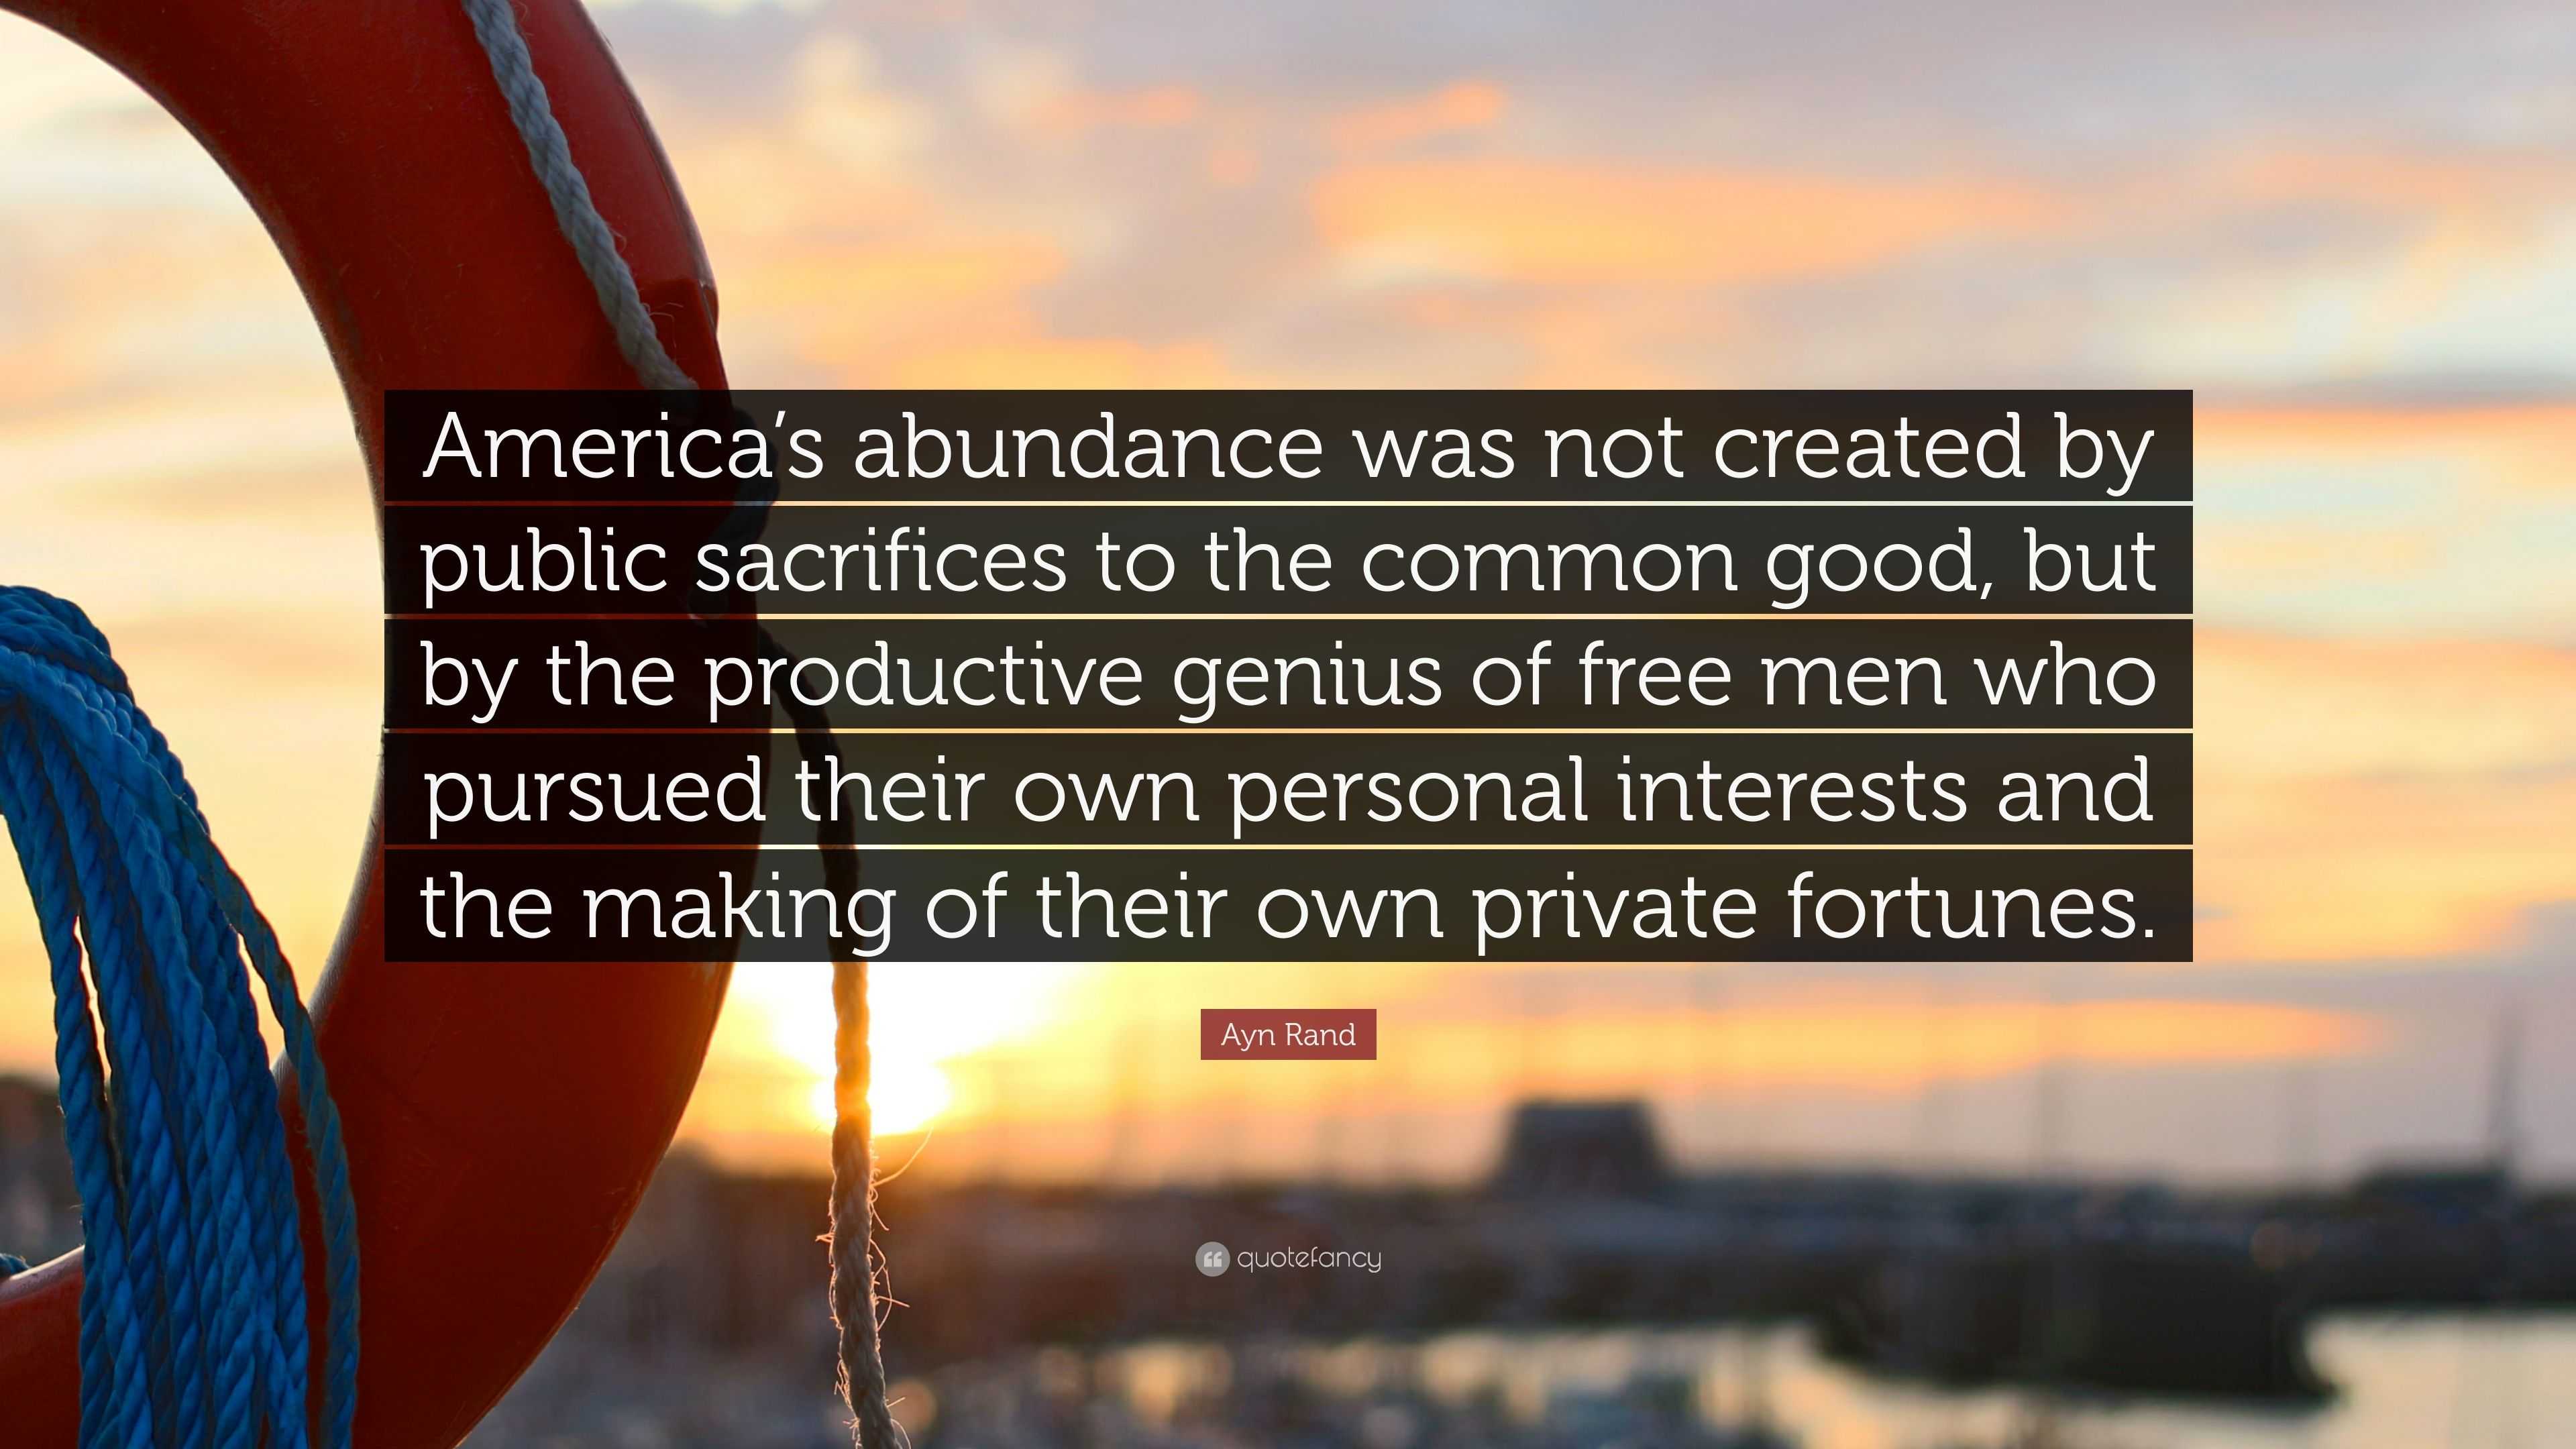 Ayn Rand Quote: “America's abundance was not created by public